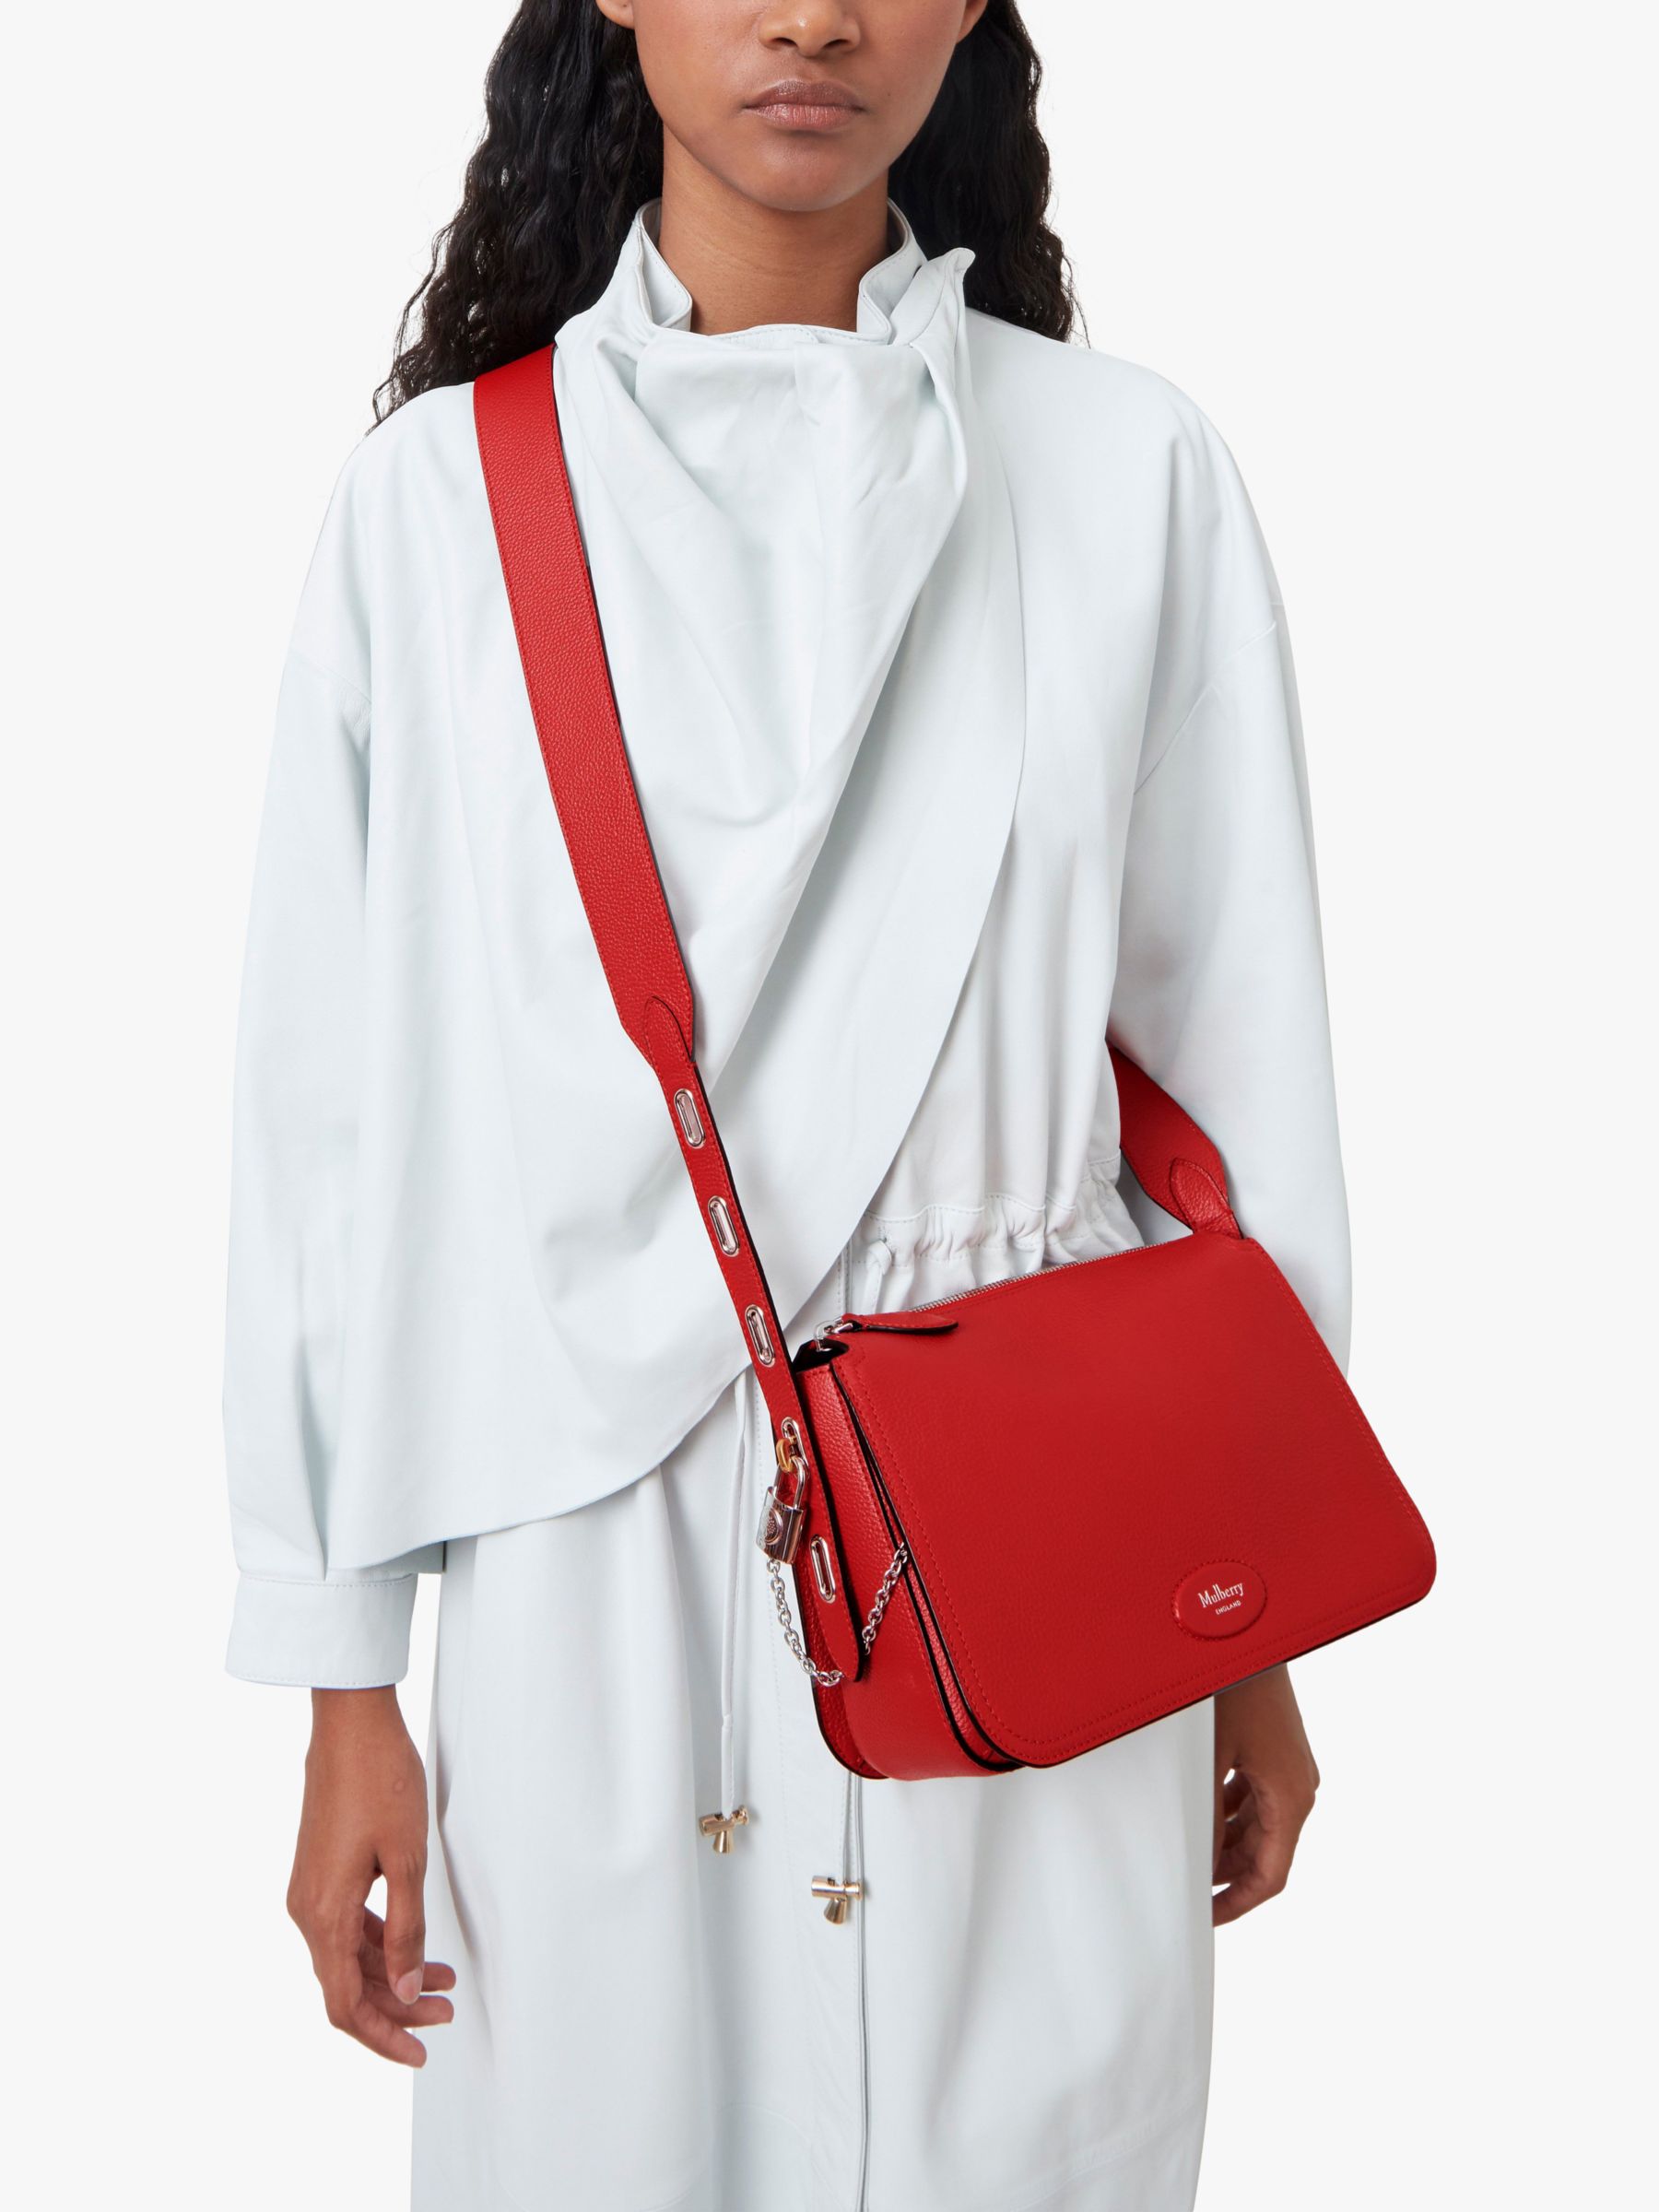 Mulberry Billie Small Classic Grain Leather Cross Body Bag, Lancaster Red  at John Lewis & Partners